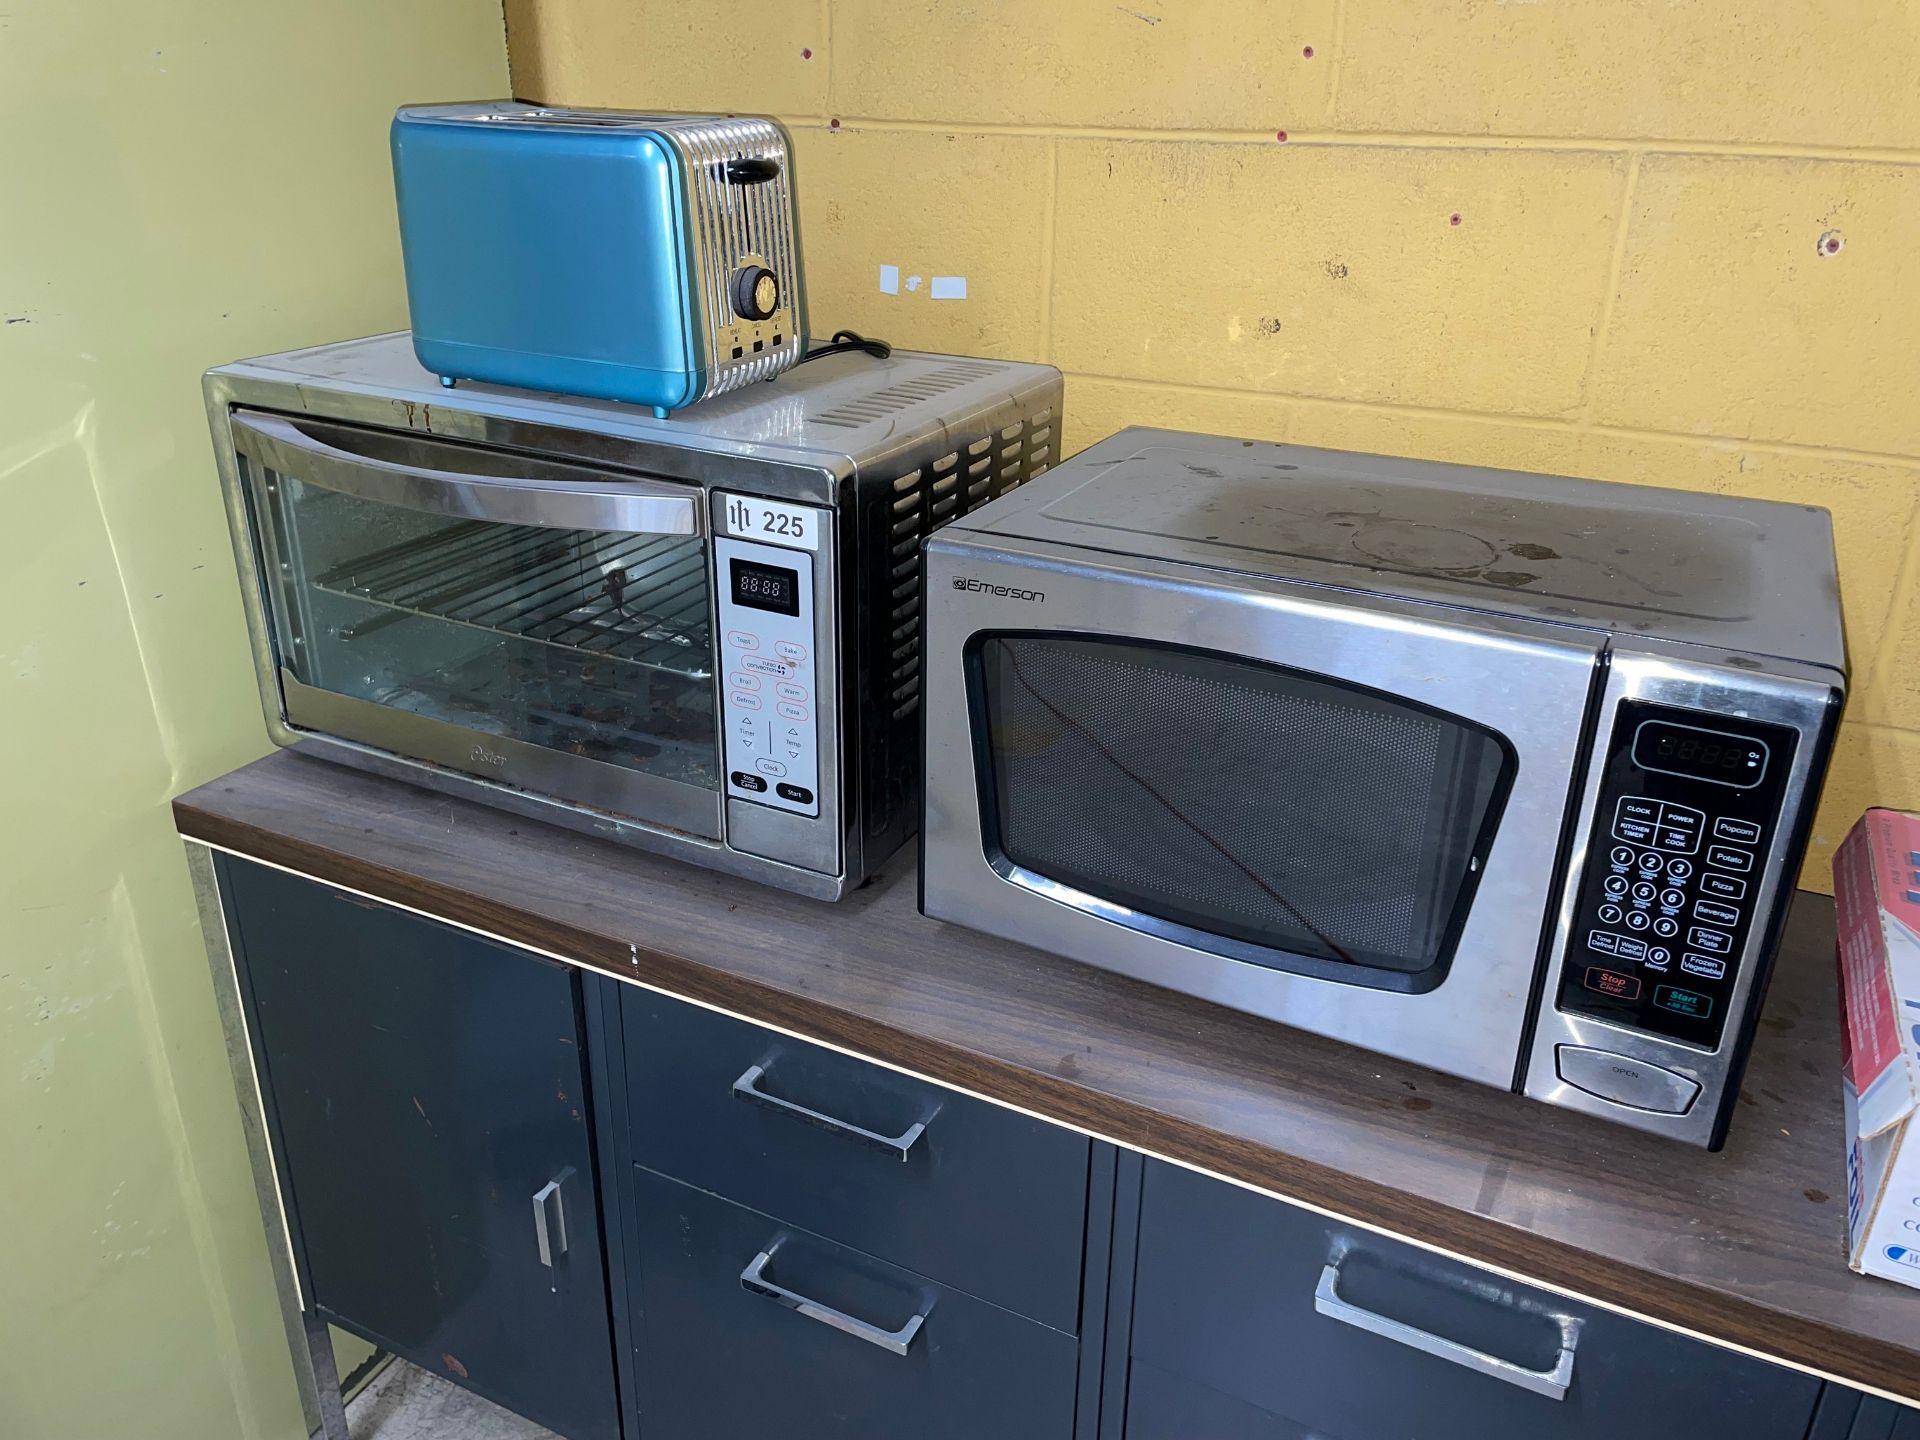 Lot including Oster Toaster Over, Emerson Microwave and Toaster - Bild 2 aus 3